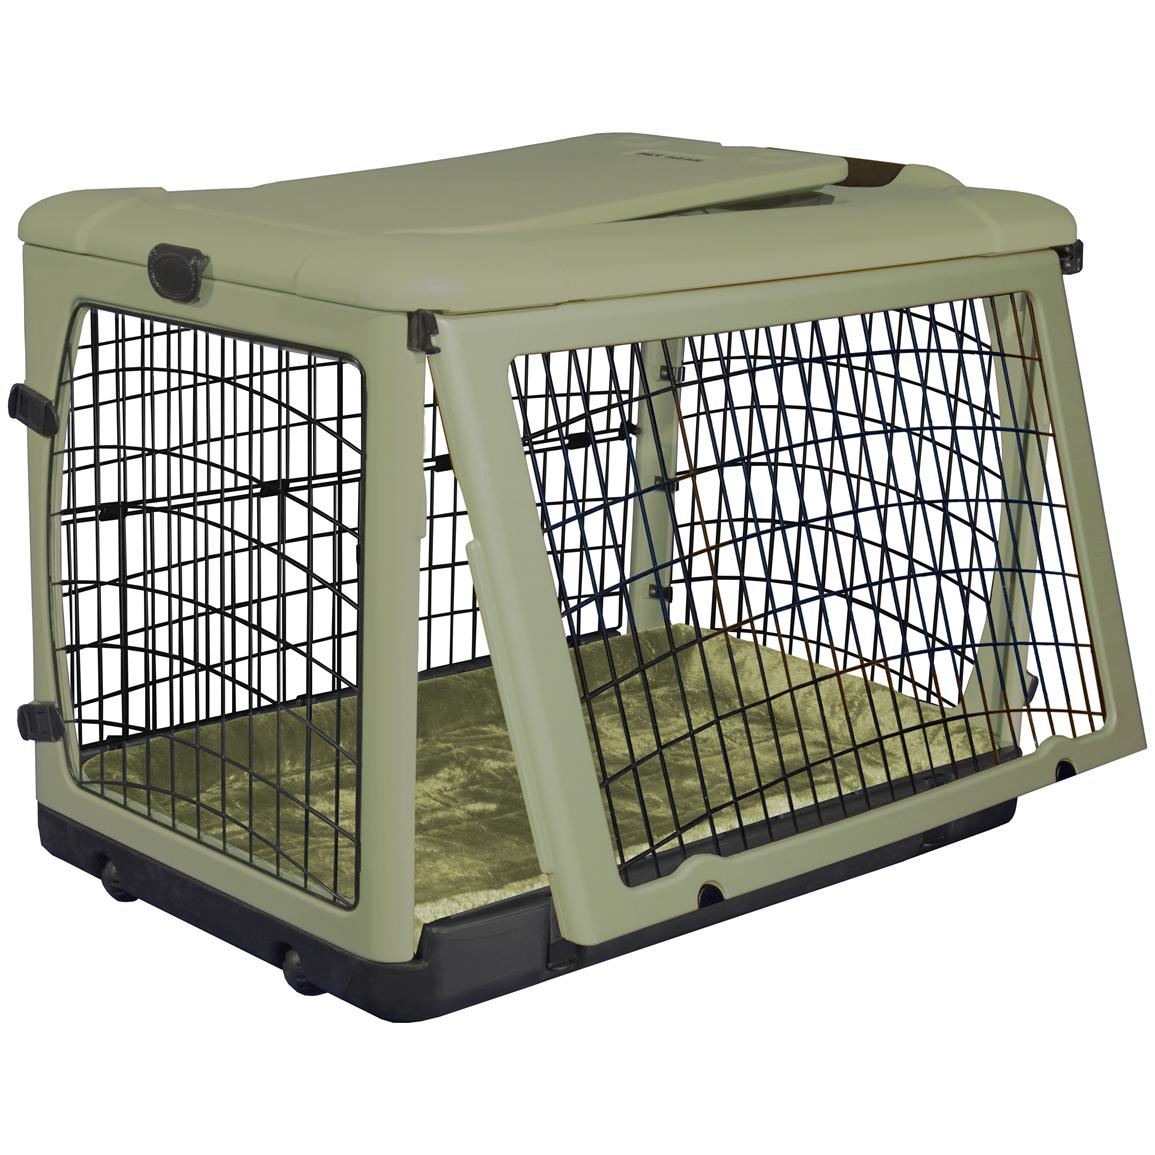 Pet Gear® The Other Door Steel Crate with Plush Pad 176274, Kennels & Beds at Sportsman's Guide